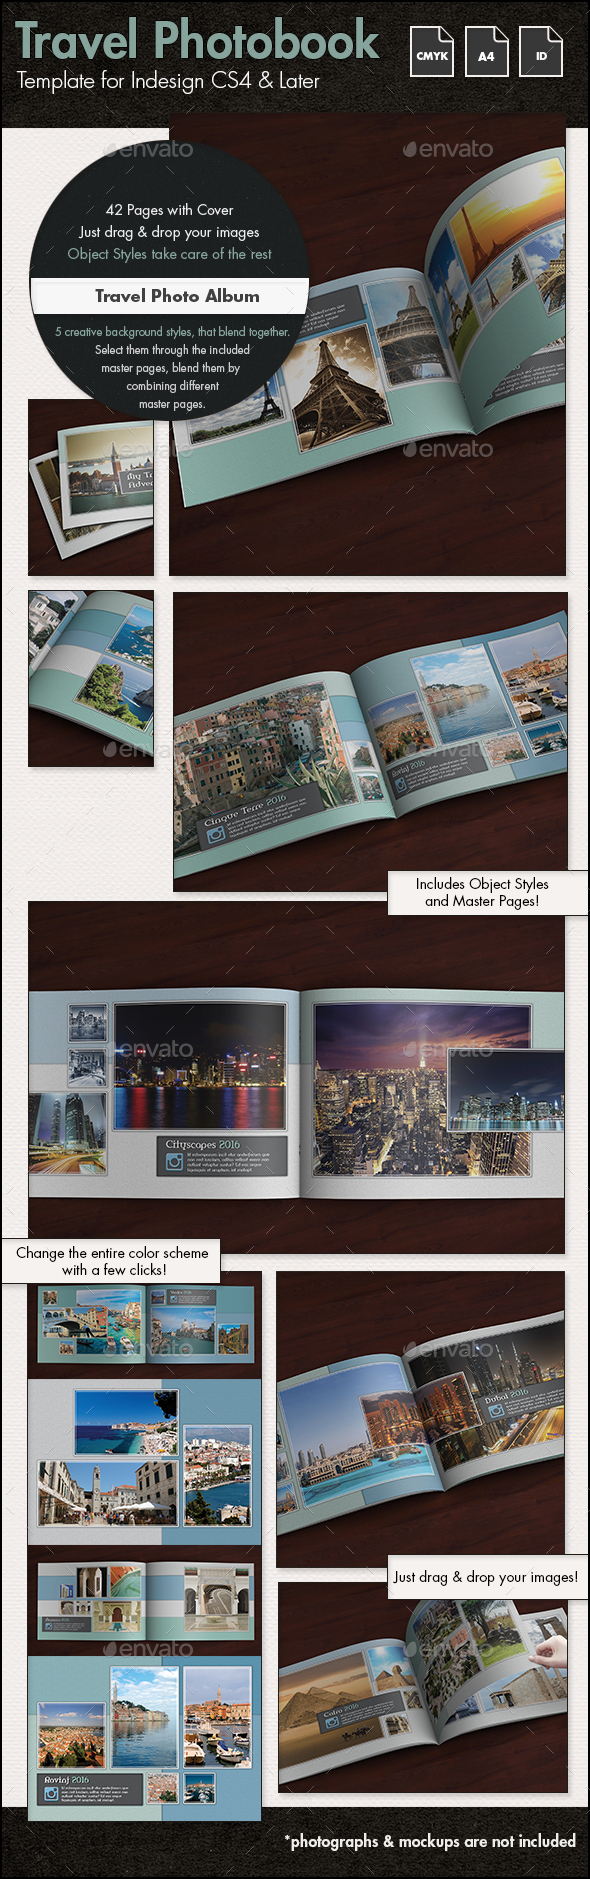 A4 Photo Album: Create and print your photo albums in A4 format at